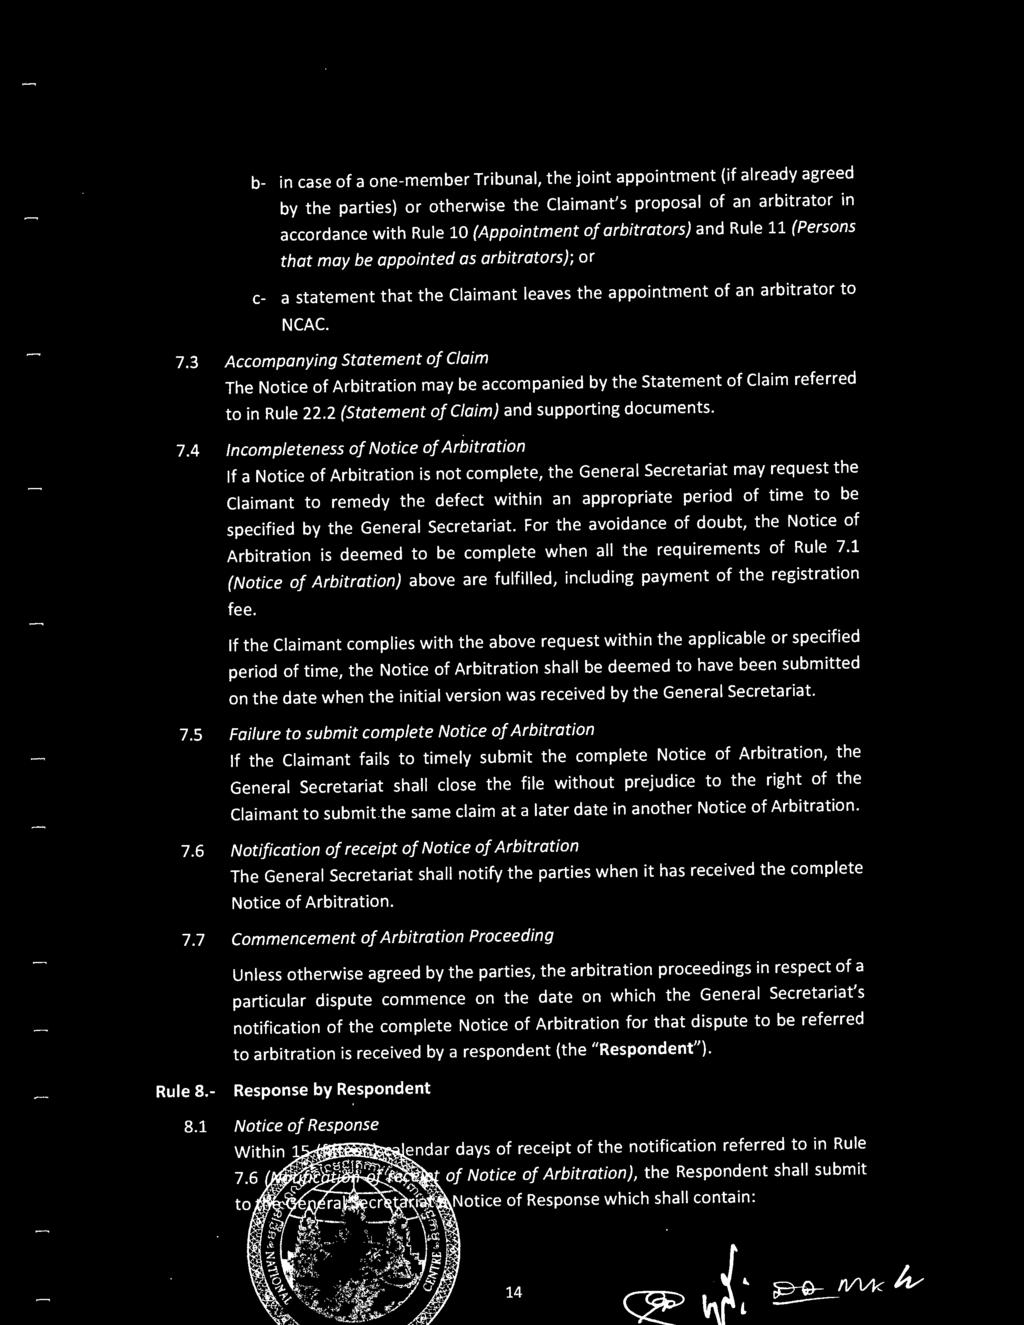 specified by the General Secretariat. For the avoidance of doubt, the Notice of Arbitration is deemed to be complete when all the requirements of Rule 7.